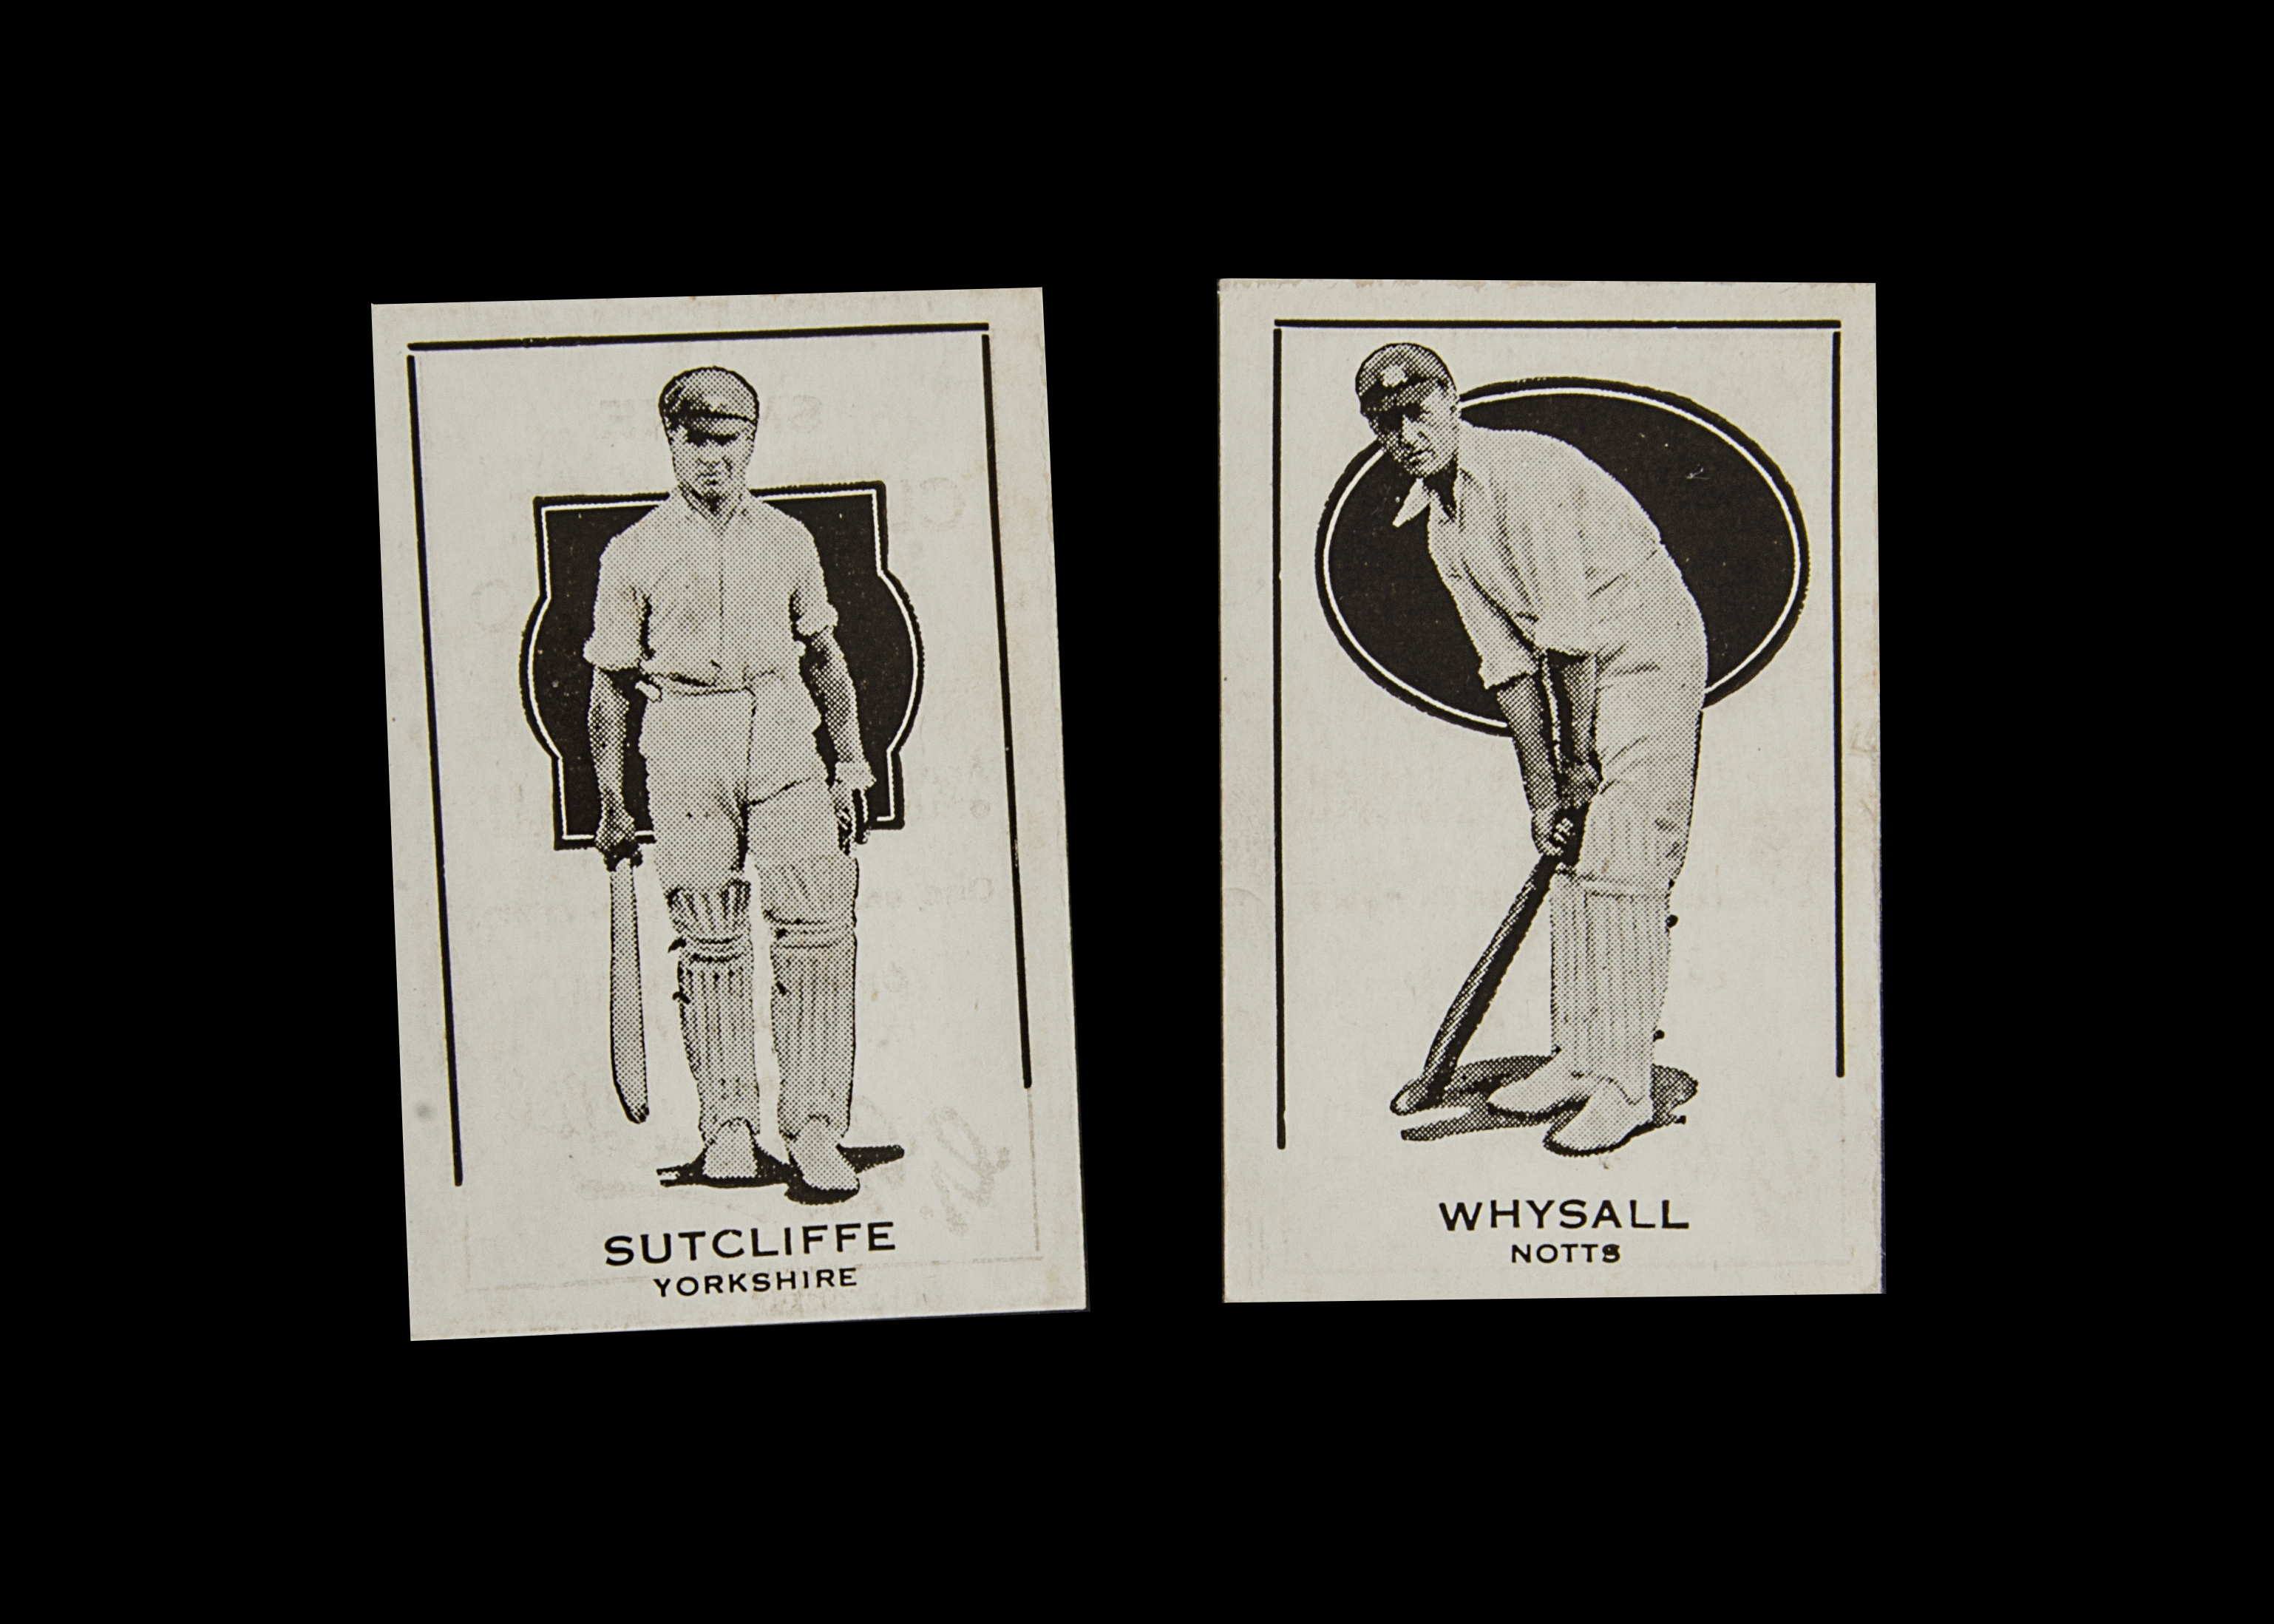 Cigarette Cards, Cricket, Australia, G.G. Goode, Prominent Cricketers, two type cards, Sutcliffe